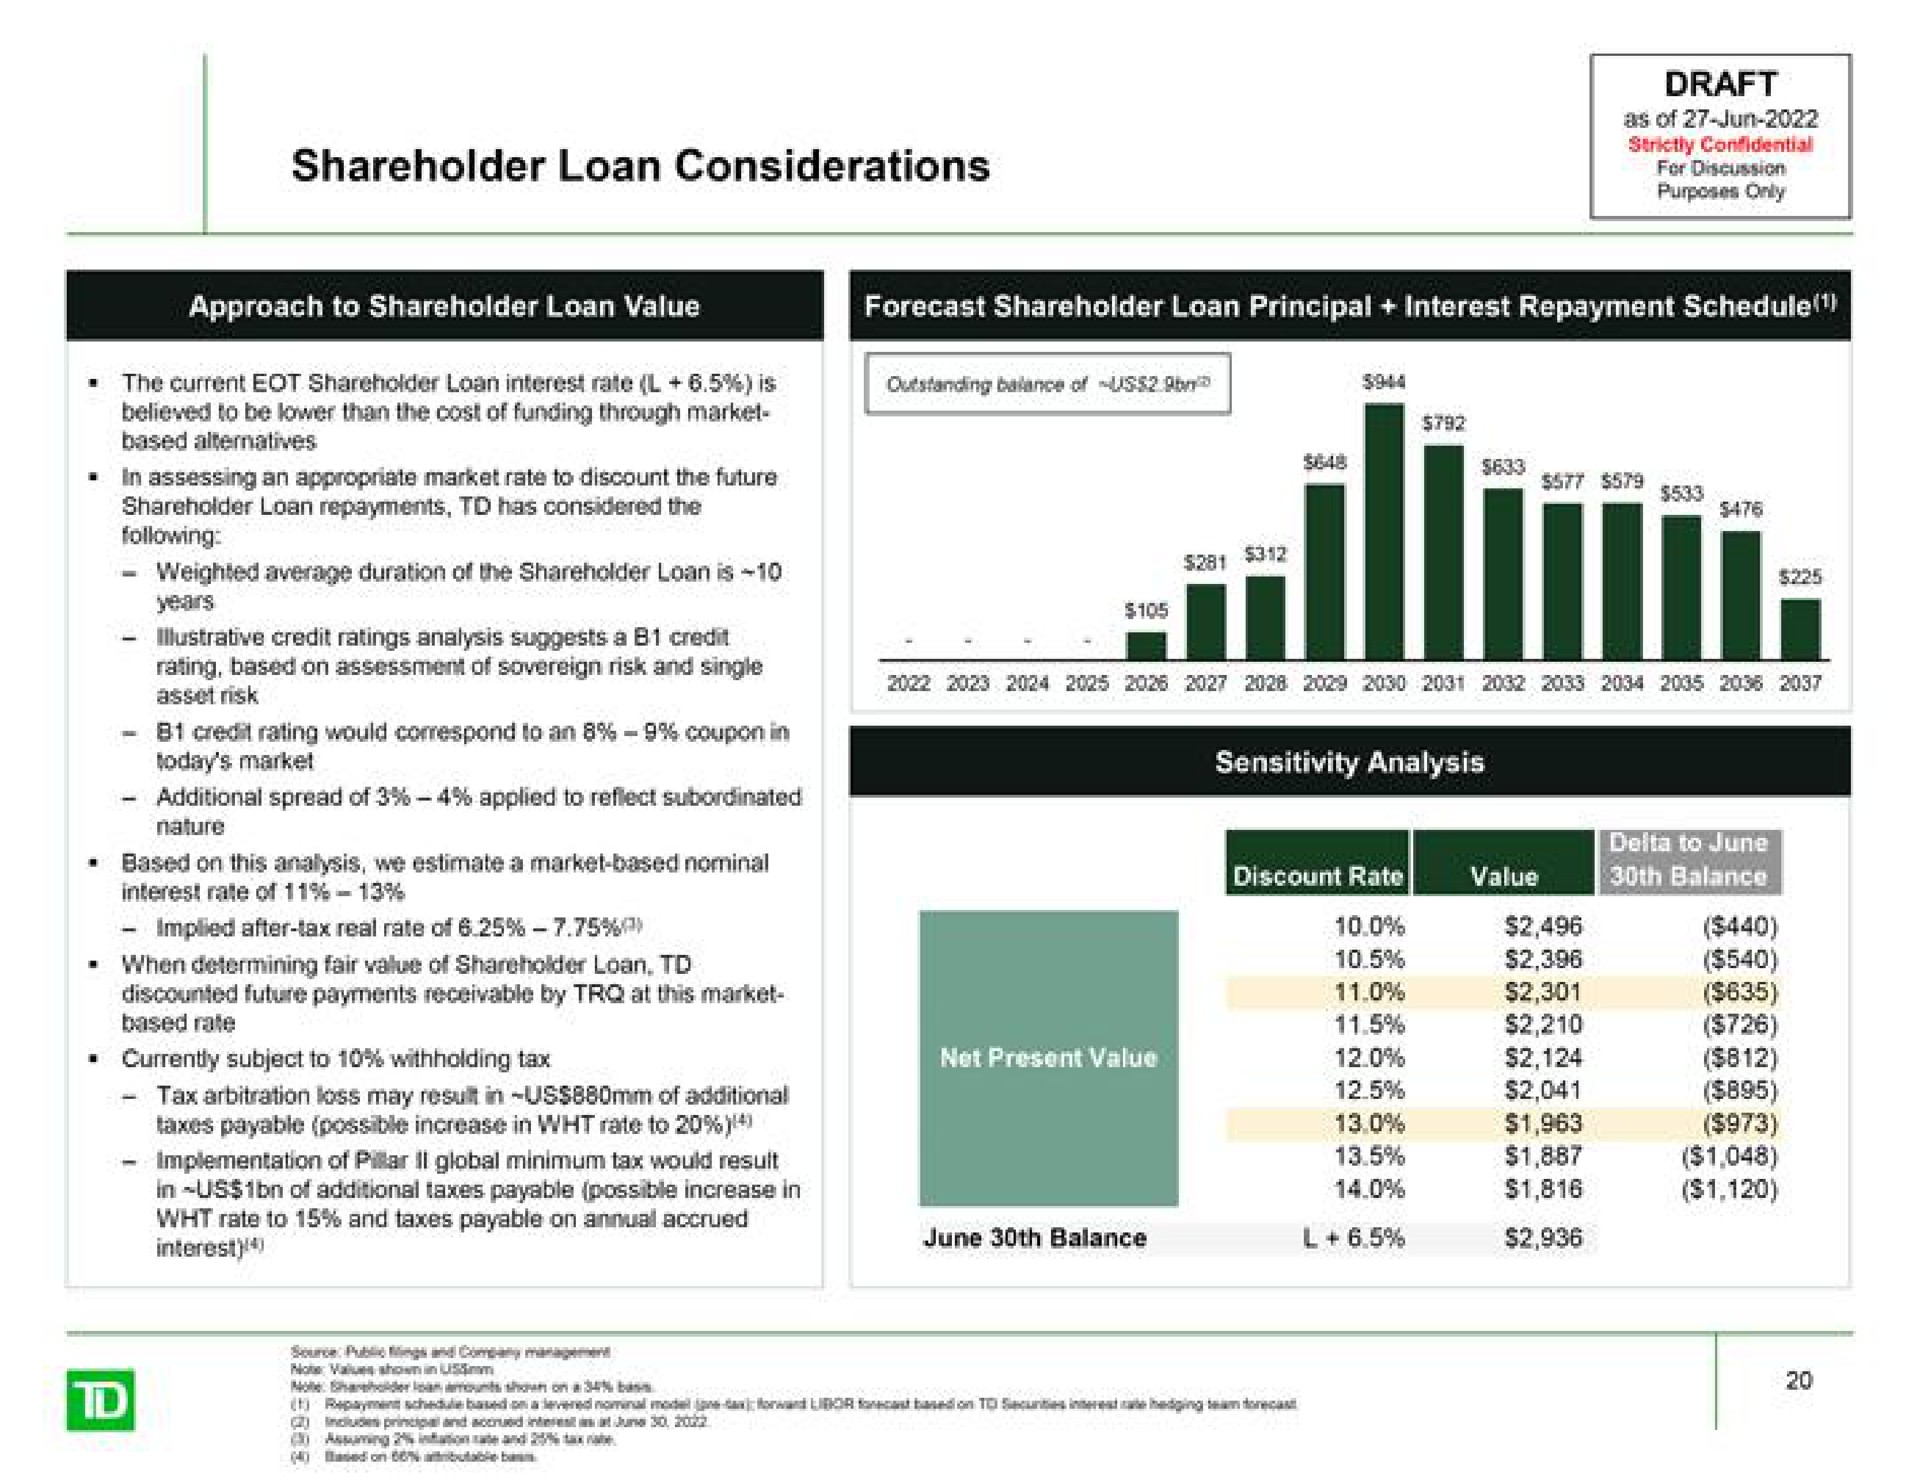 shareholder loan considerations for discussion june balance | TD Securities